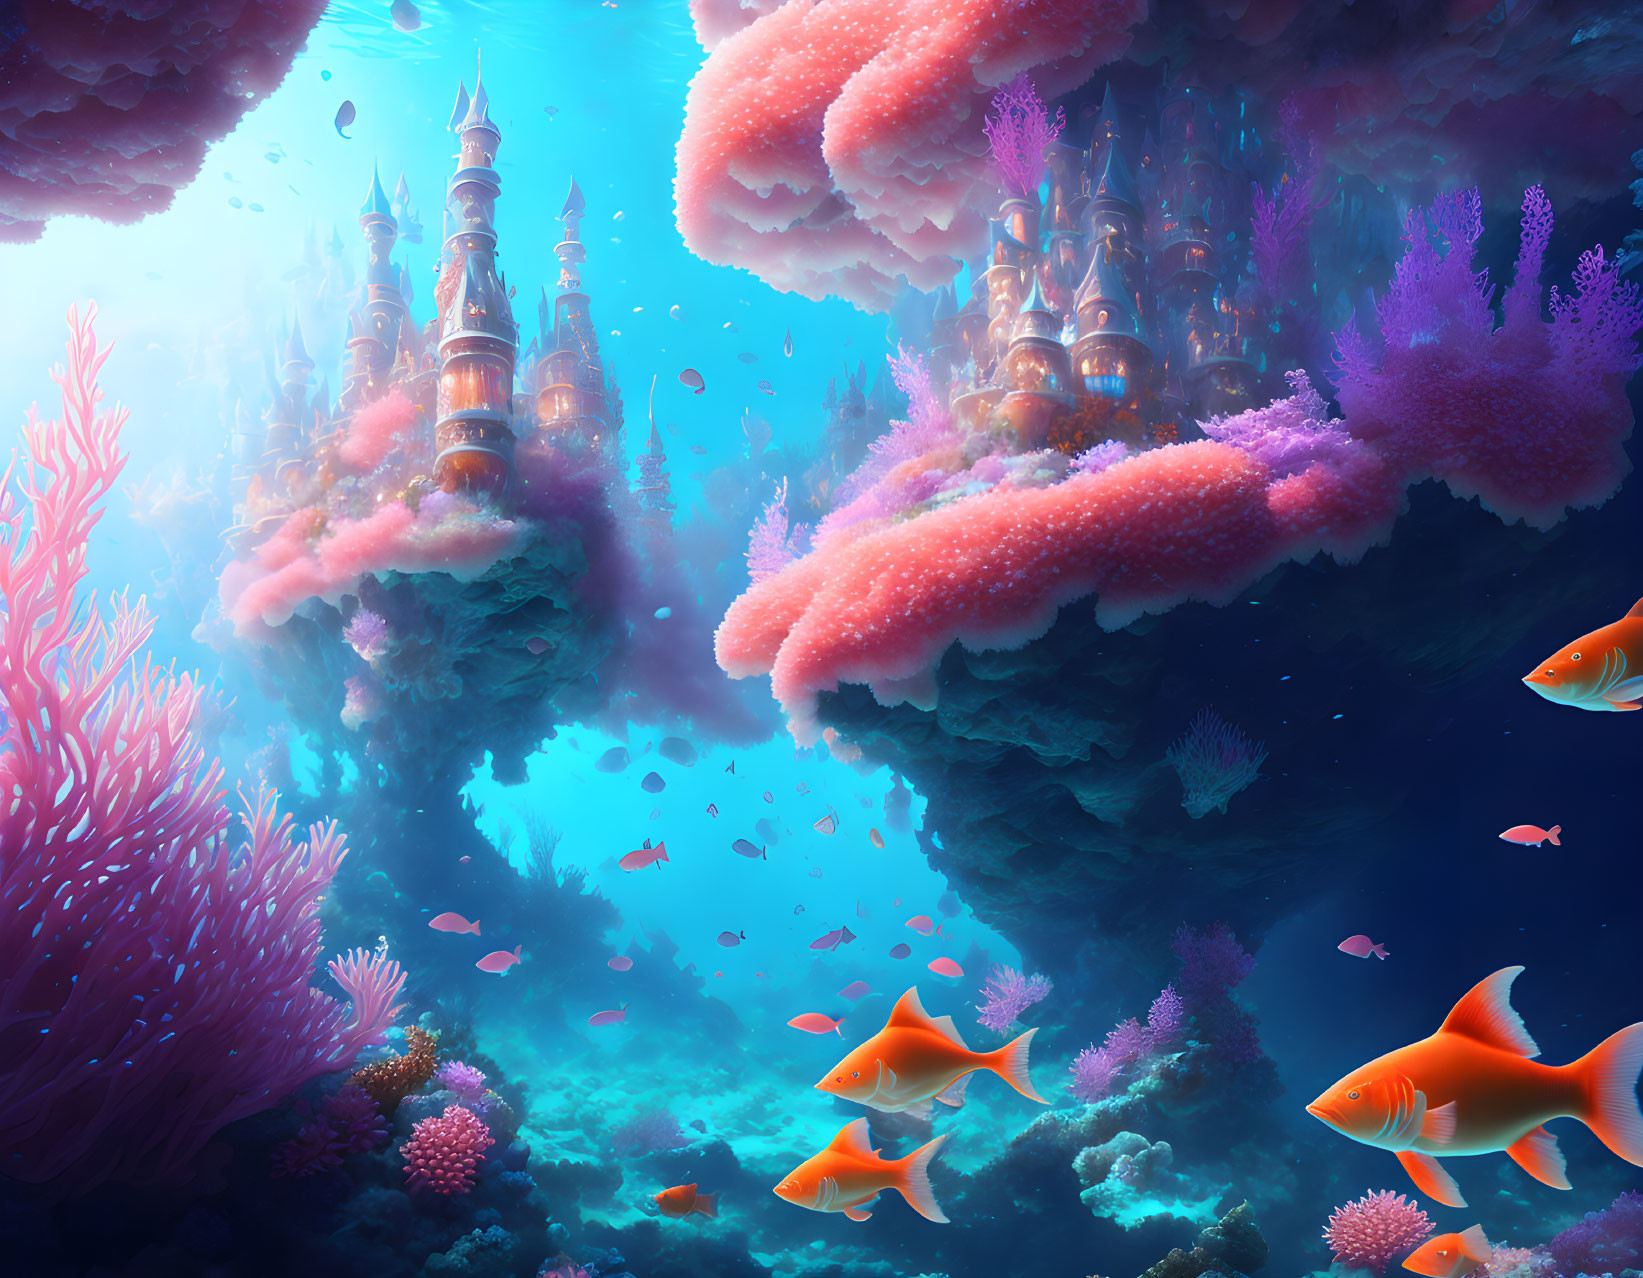 Colorful Coral Castle Structures in Underwater Fantasy Scene